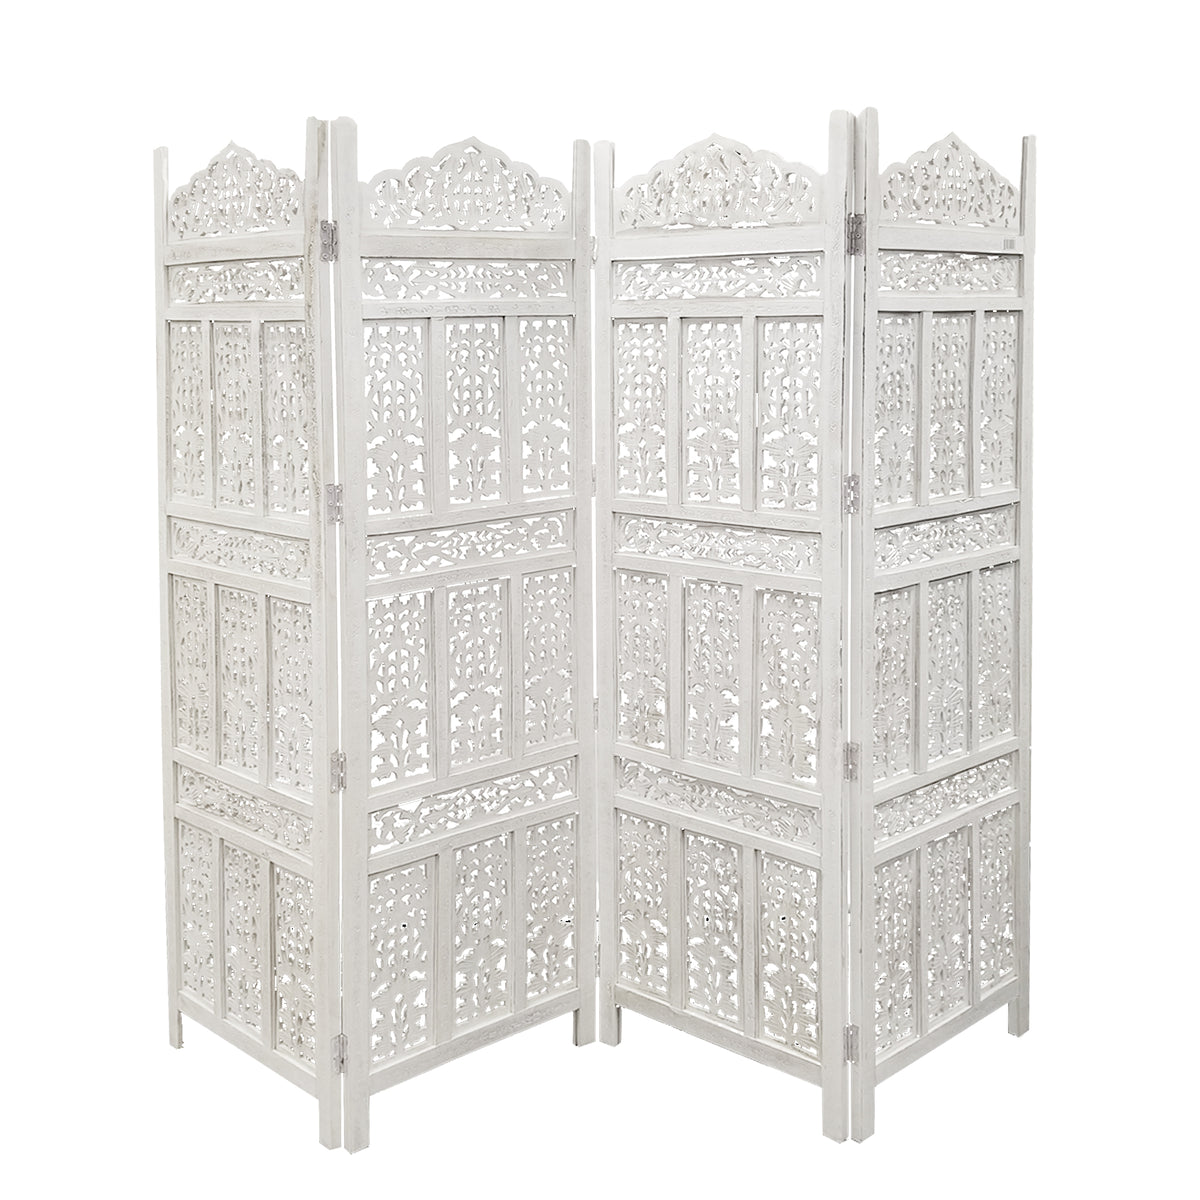 Aesthetically Carved 4 Panel Wooden Partition Screen/Room Divider, Distressed White - UPT-148945